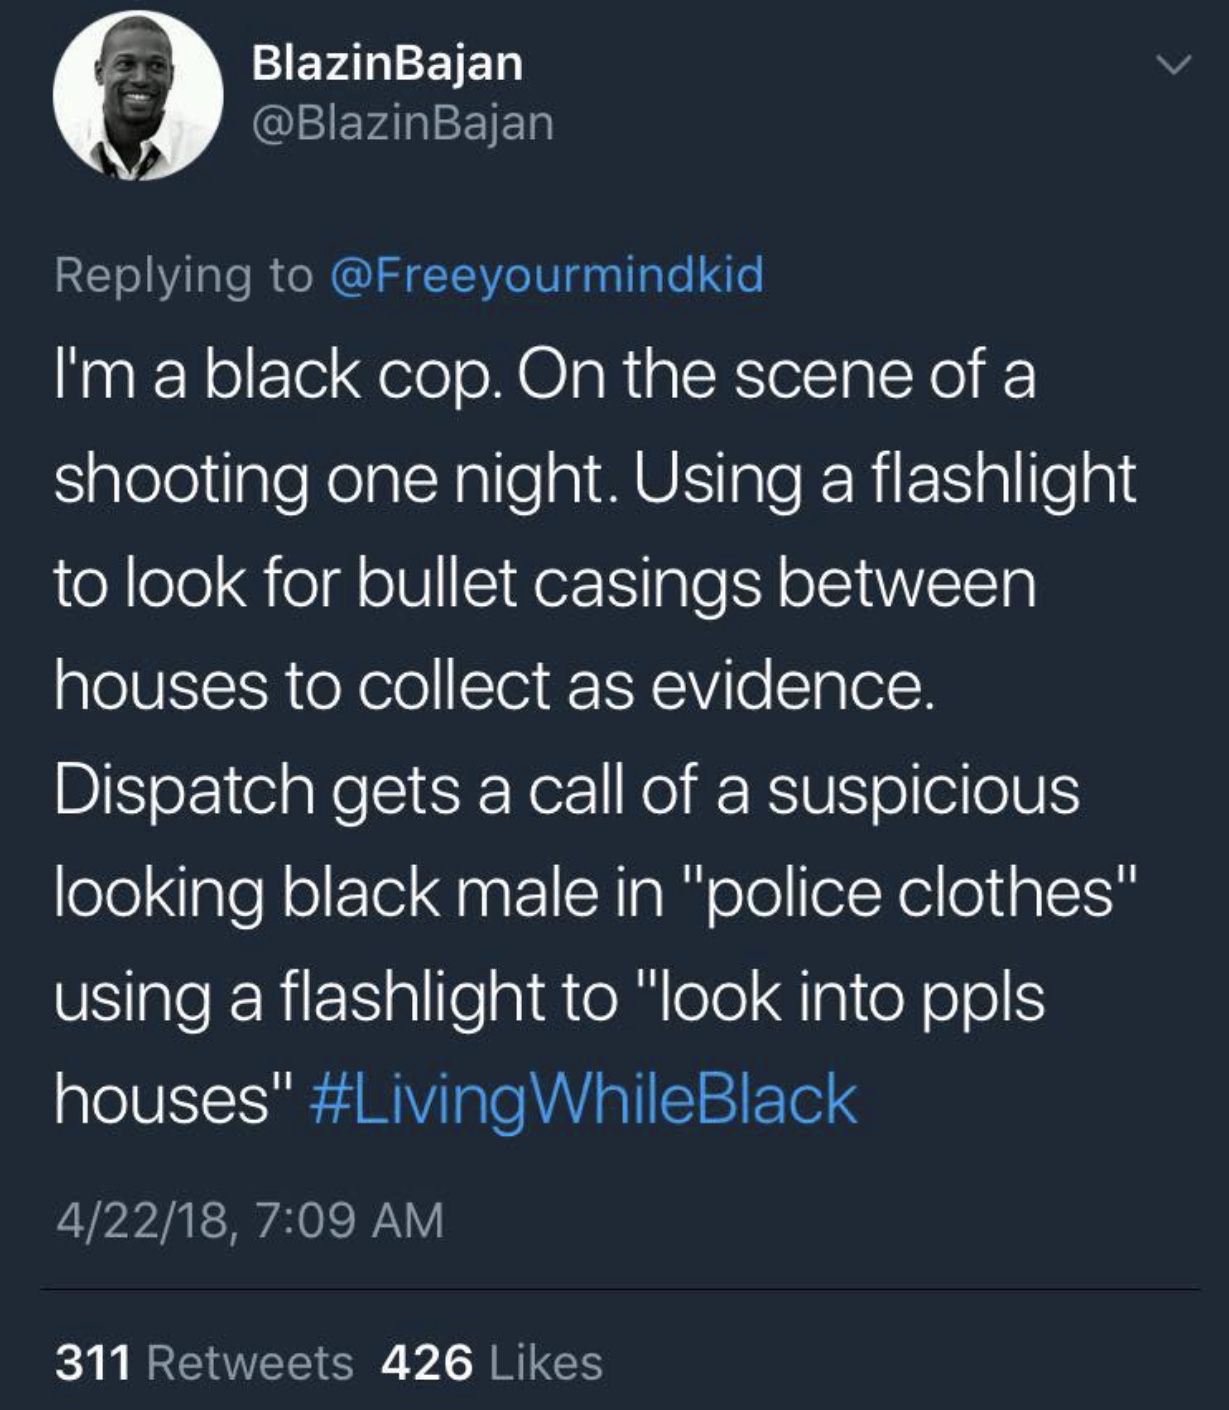 sjw book burning - BlazinBajan I'm a black cop. On the scene of a shooting one night. Using a flashlight to look for bullet casings between houses to collect as evidence. Dispatch gets a call of a suspicious looking black male in "police clothes" using a 